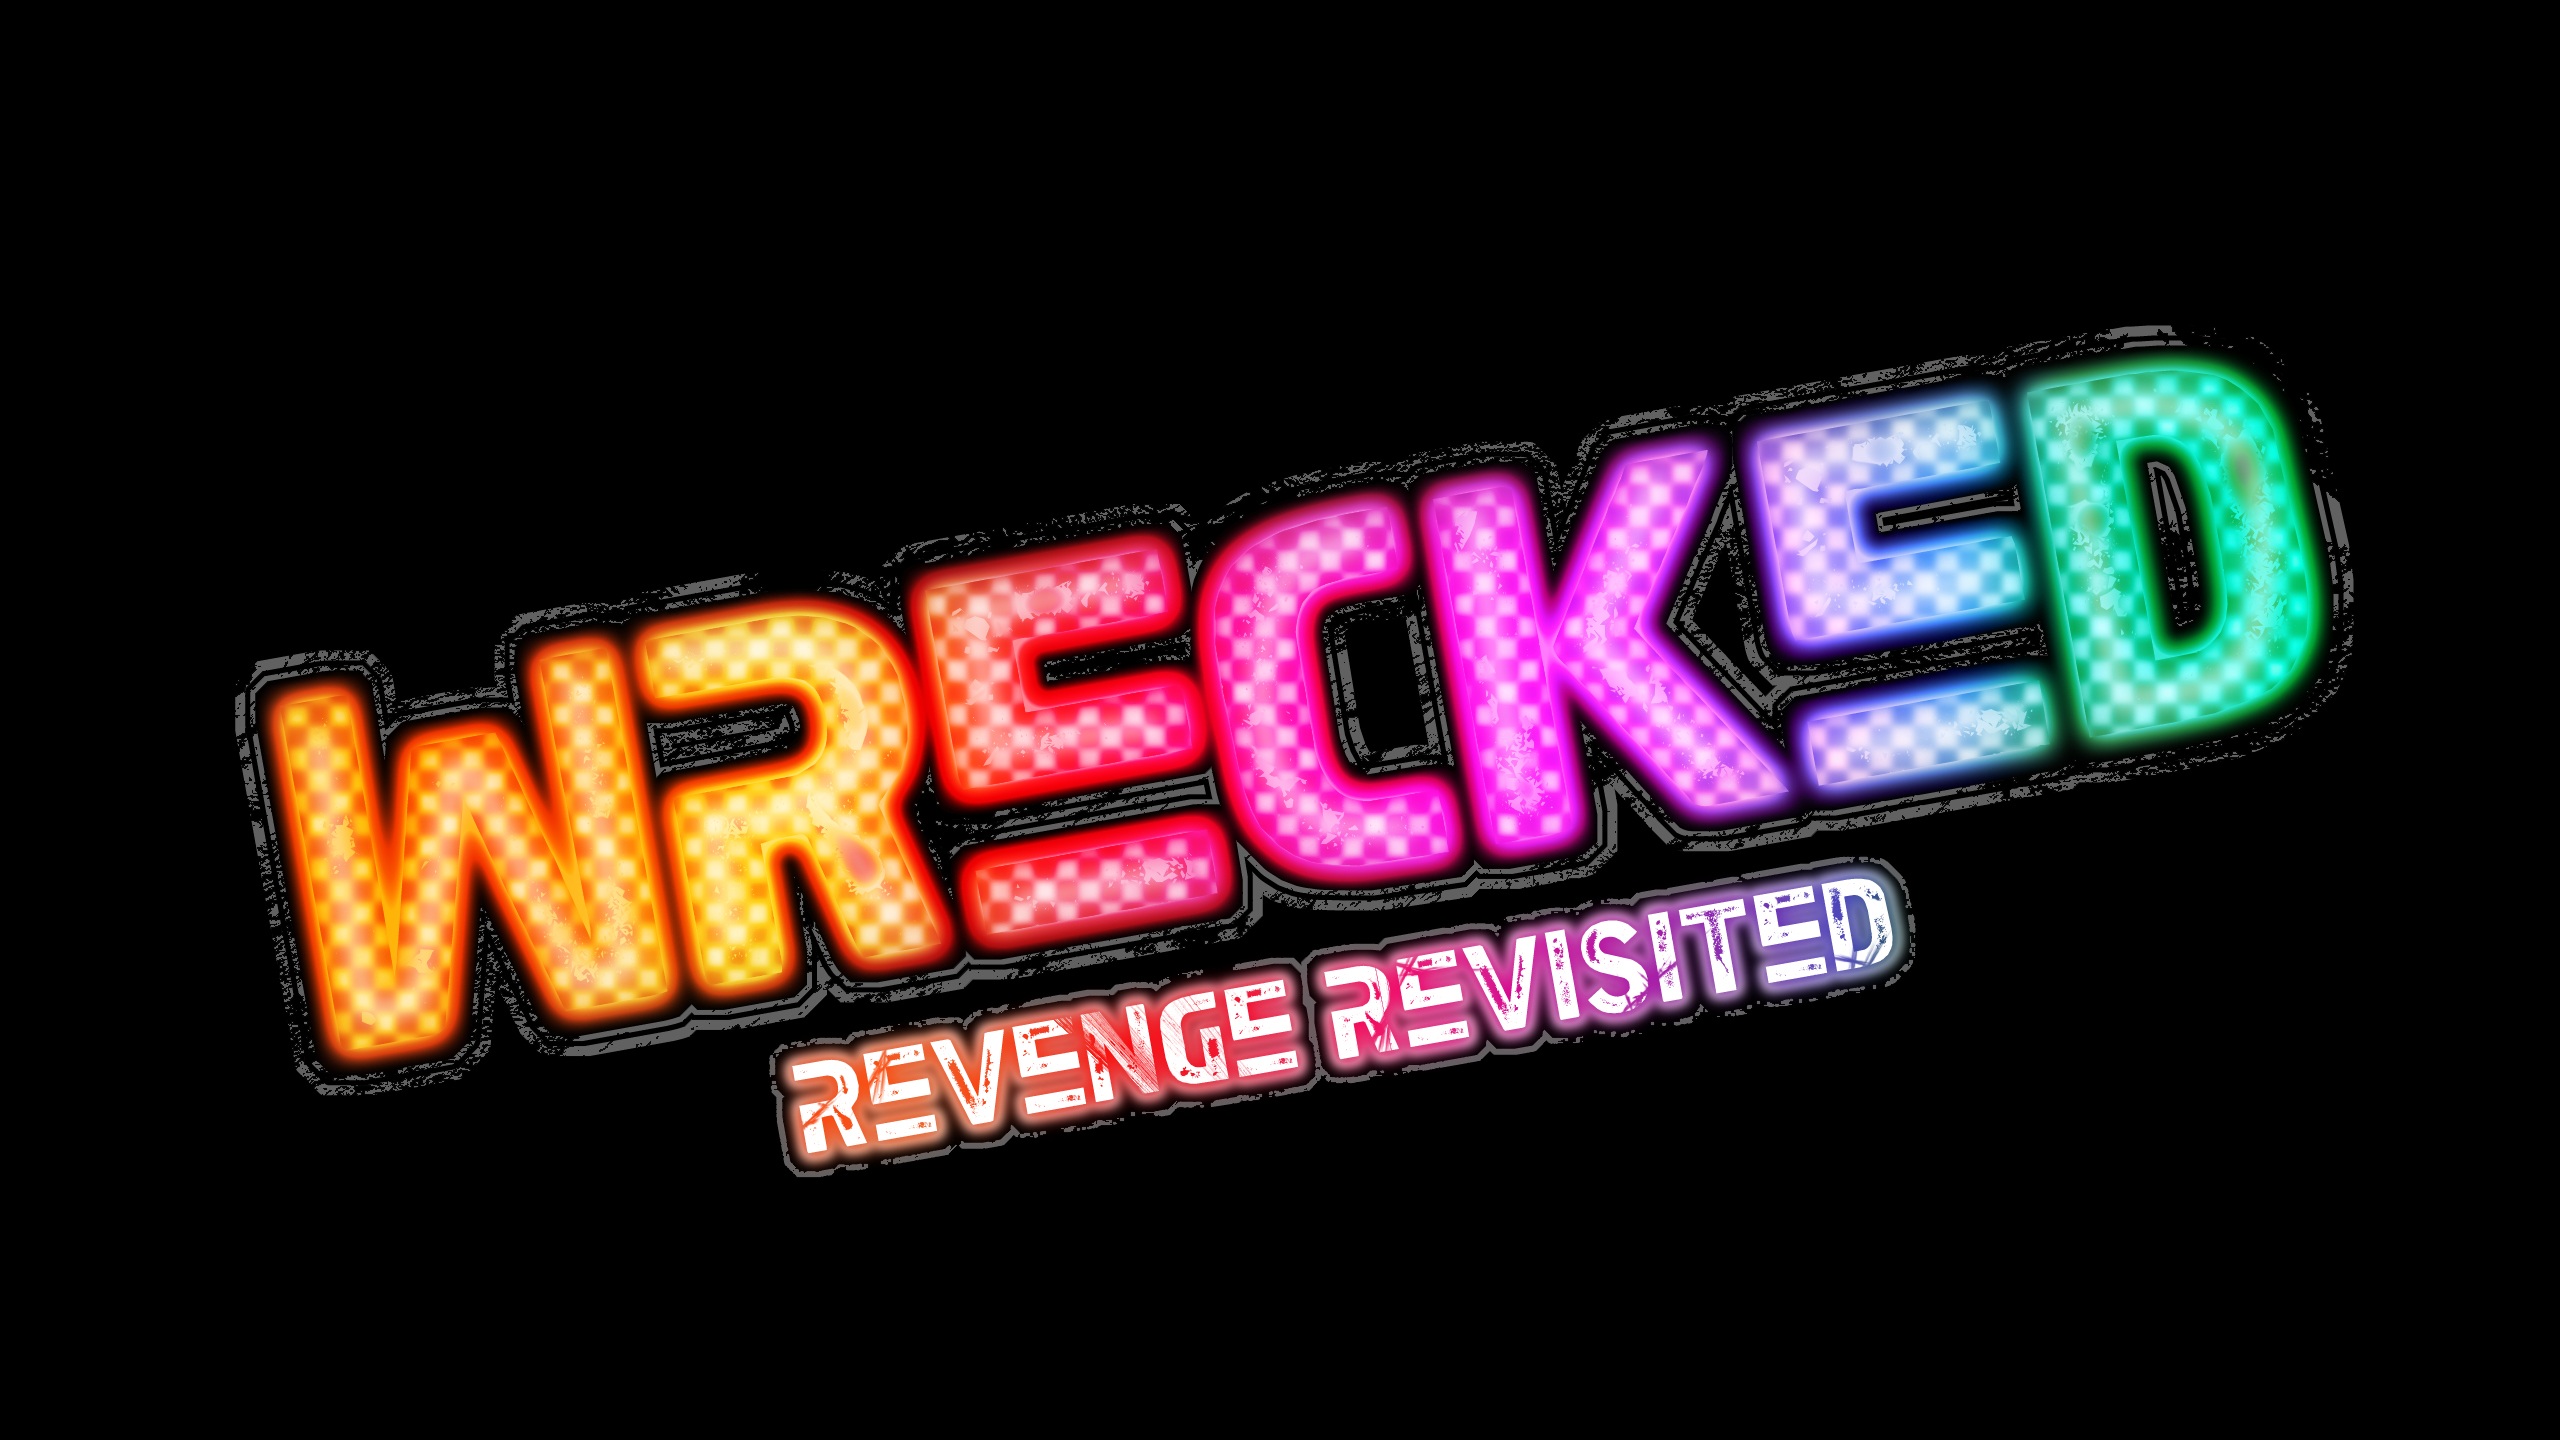 Wrecked: Revenge Revisited visiting earlier than expected